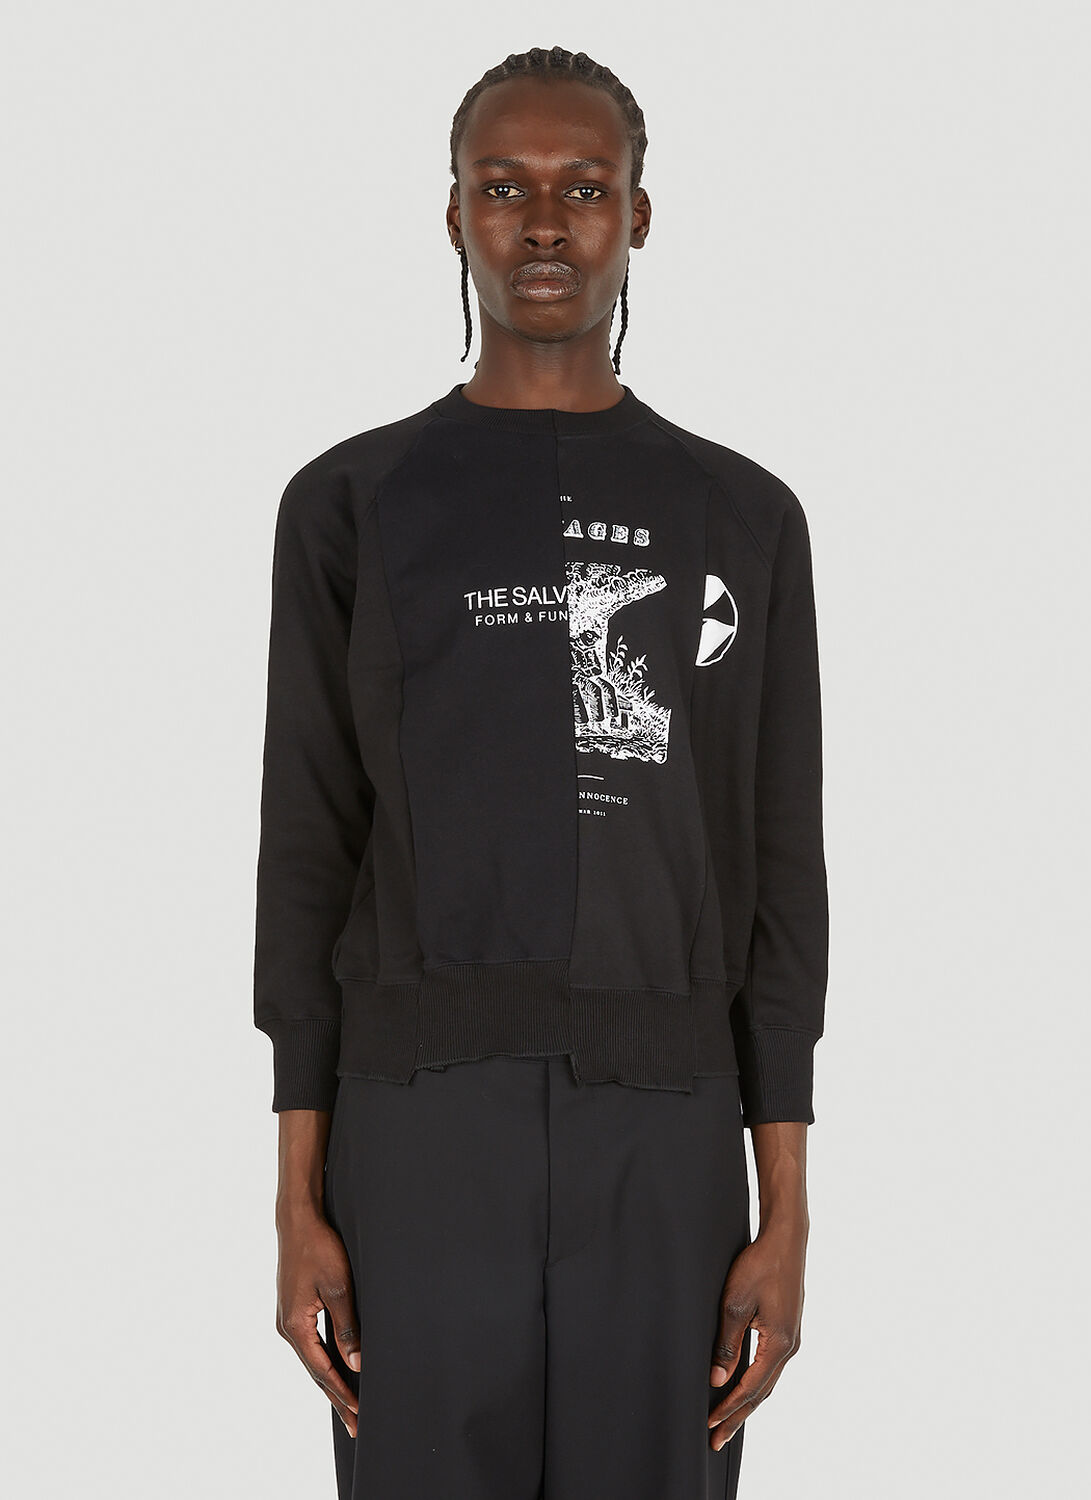 The Salvages Constructed Of Different Shades Sweatshirt In Black